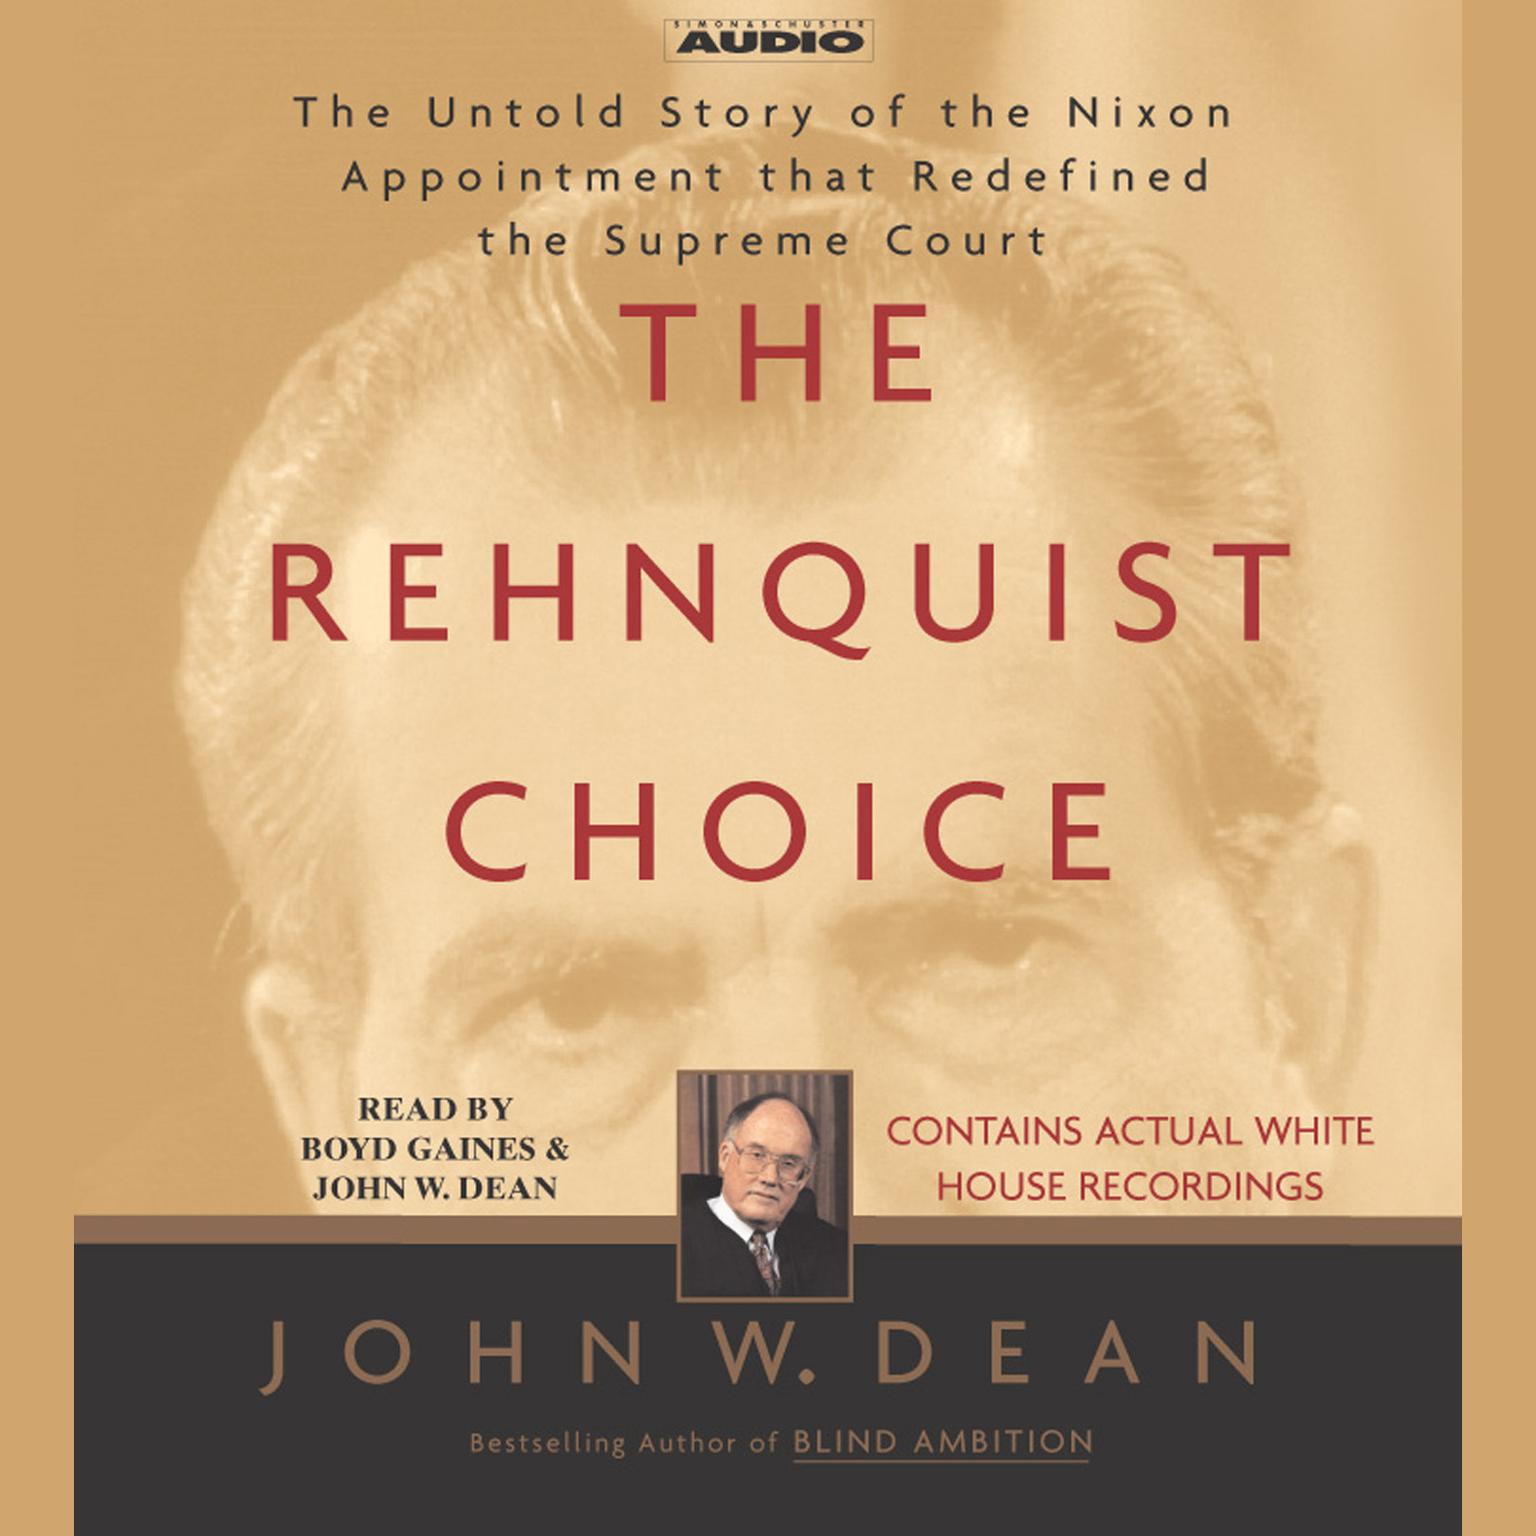 The Rehnquist Choice (Abridged): The Untold Story of the Nixon Appointment that Redefined the Supreme Court Audiobook, by John W. Dean